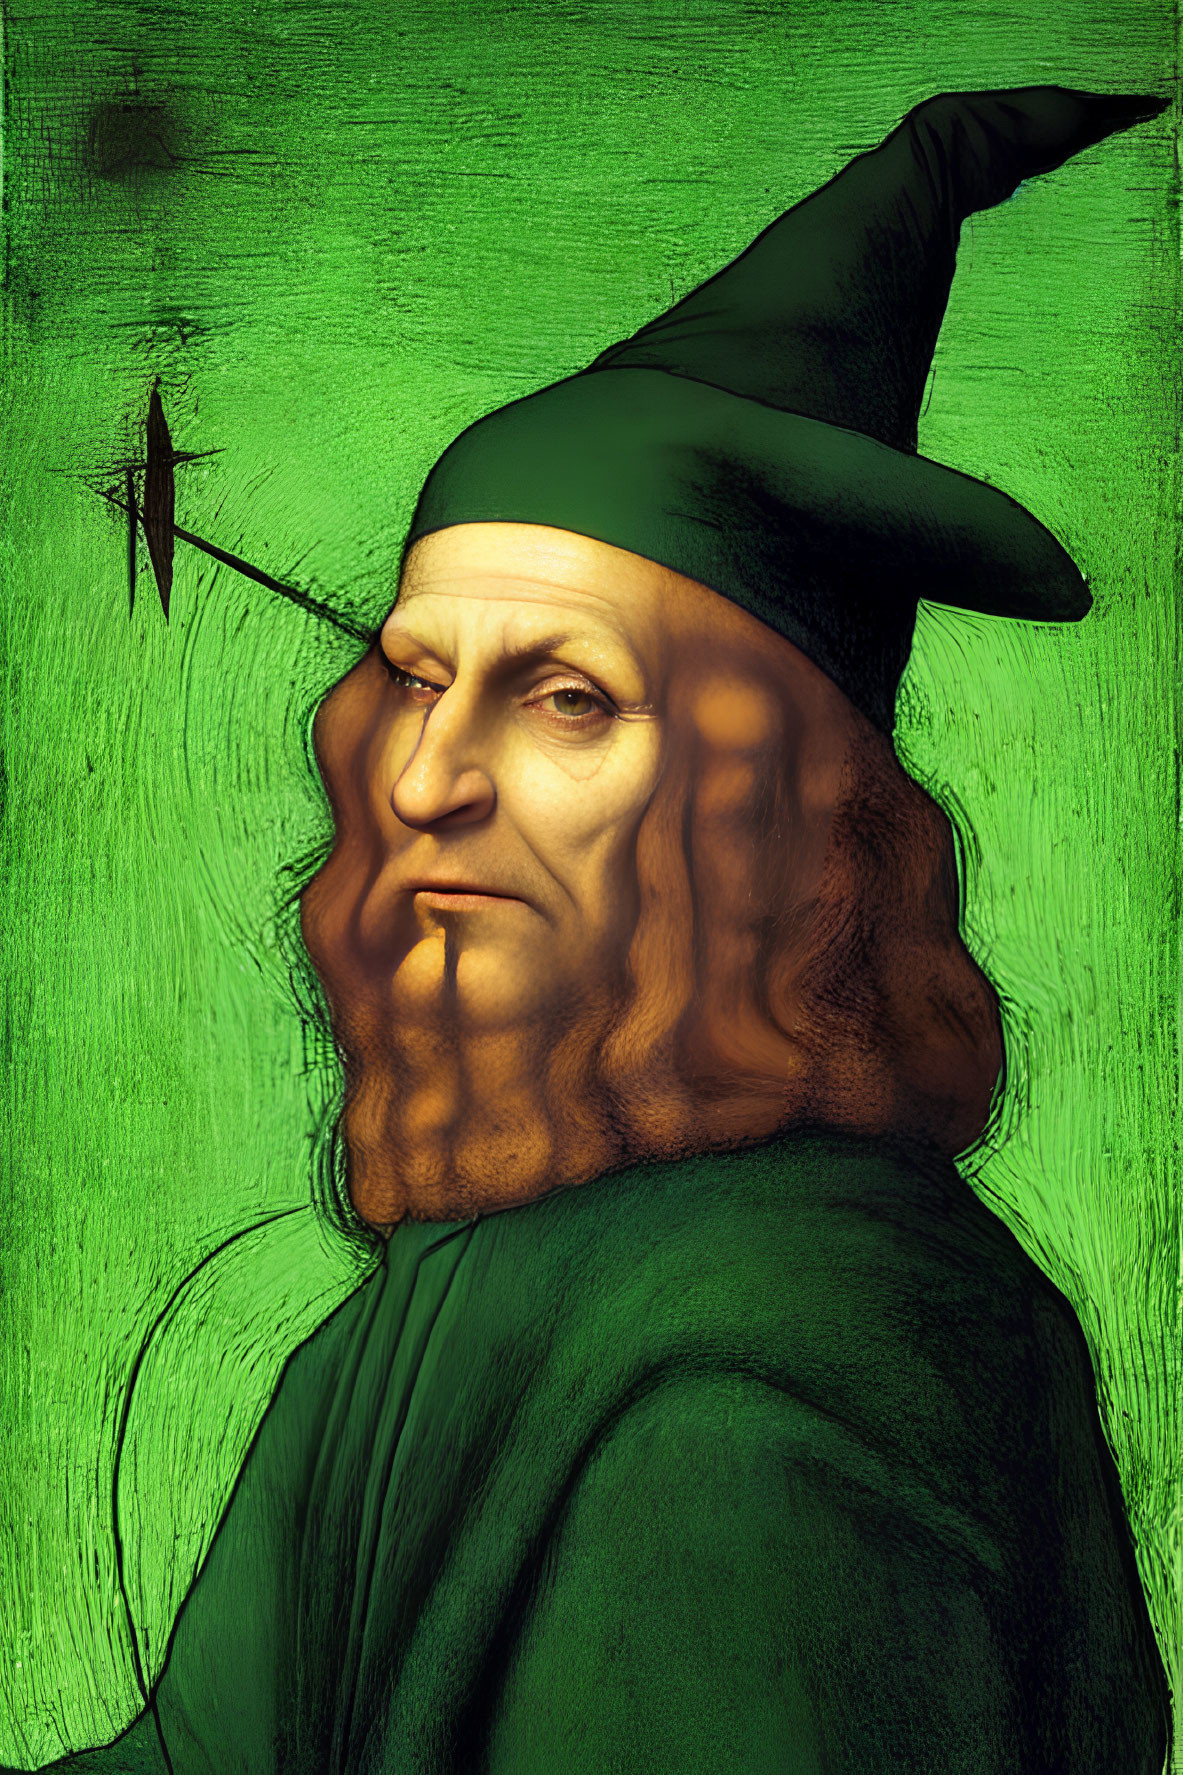 Man in wizard attire with stern expression against green backdrop